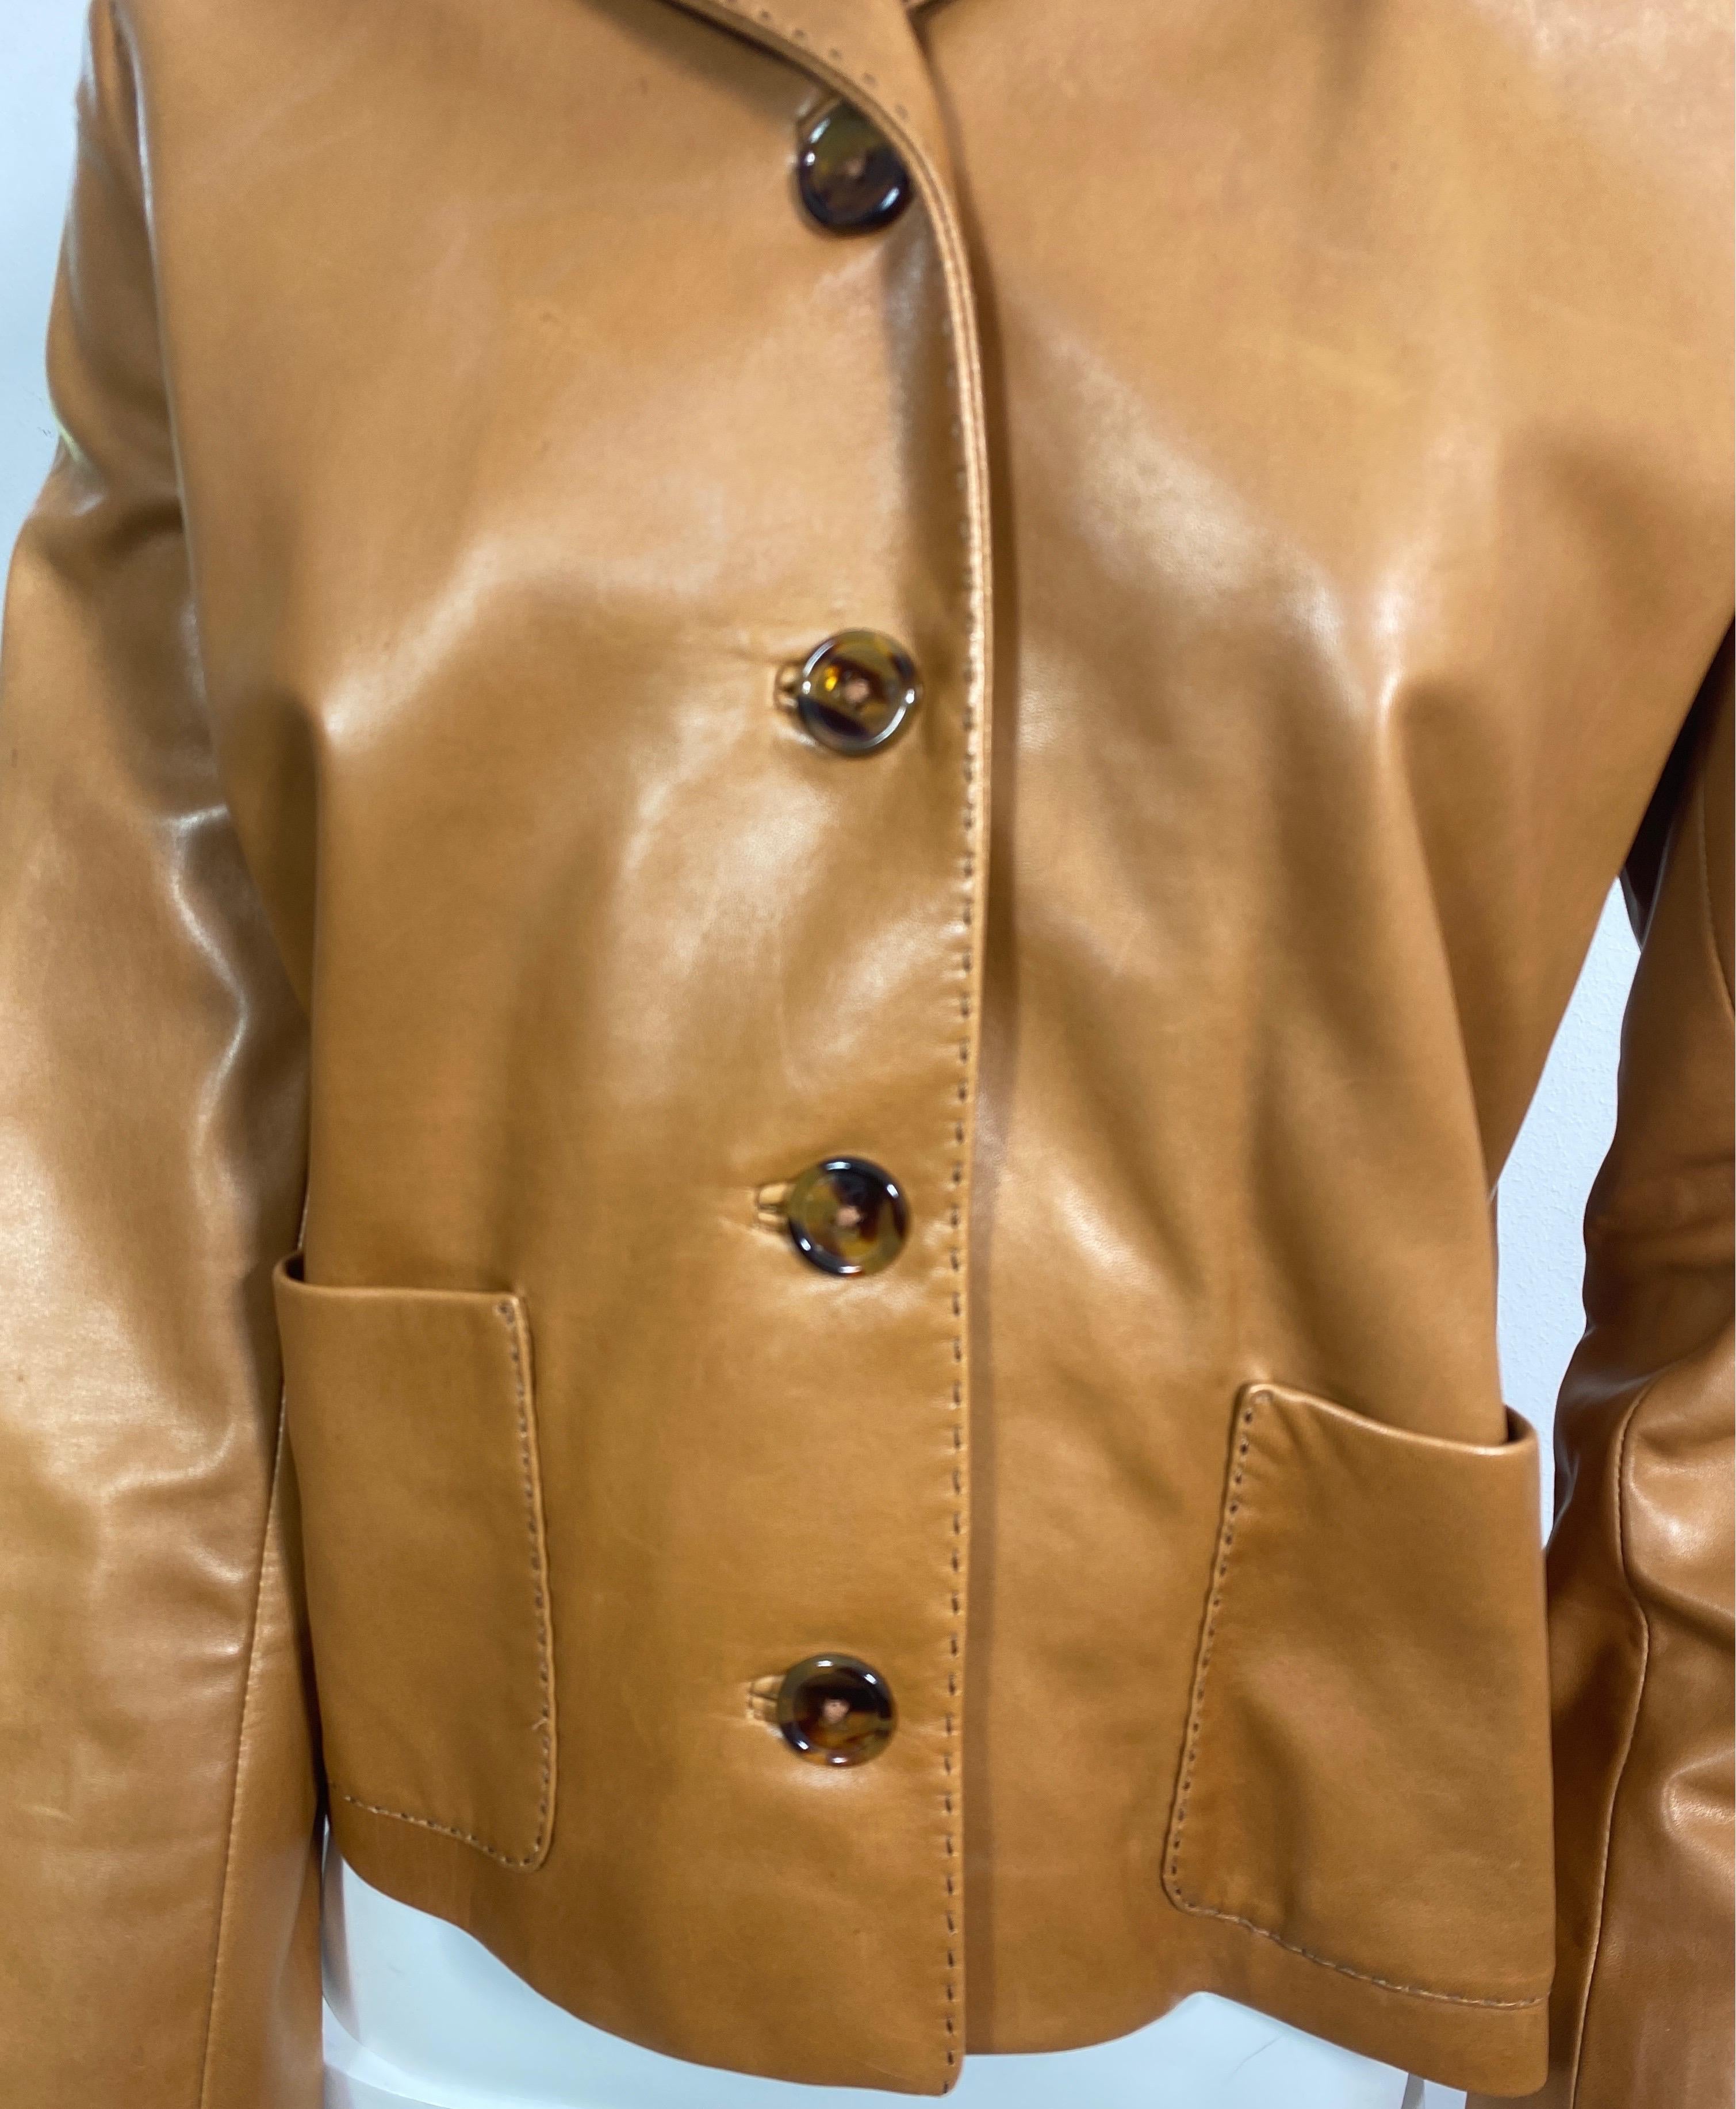 Ralph Lauren Purple Label Caramel Leather Jacket -Size 6 This jacket has a straight almost boxy style to it, is fully lined, is made of a very soft lamb skin leather, has 5 front buttons, 2 front patch pockets, and a detail stitching throughout the